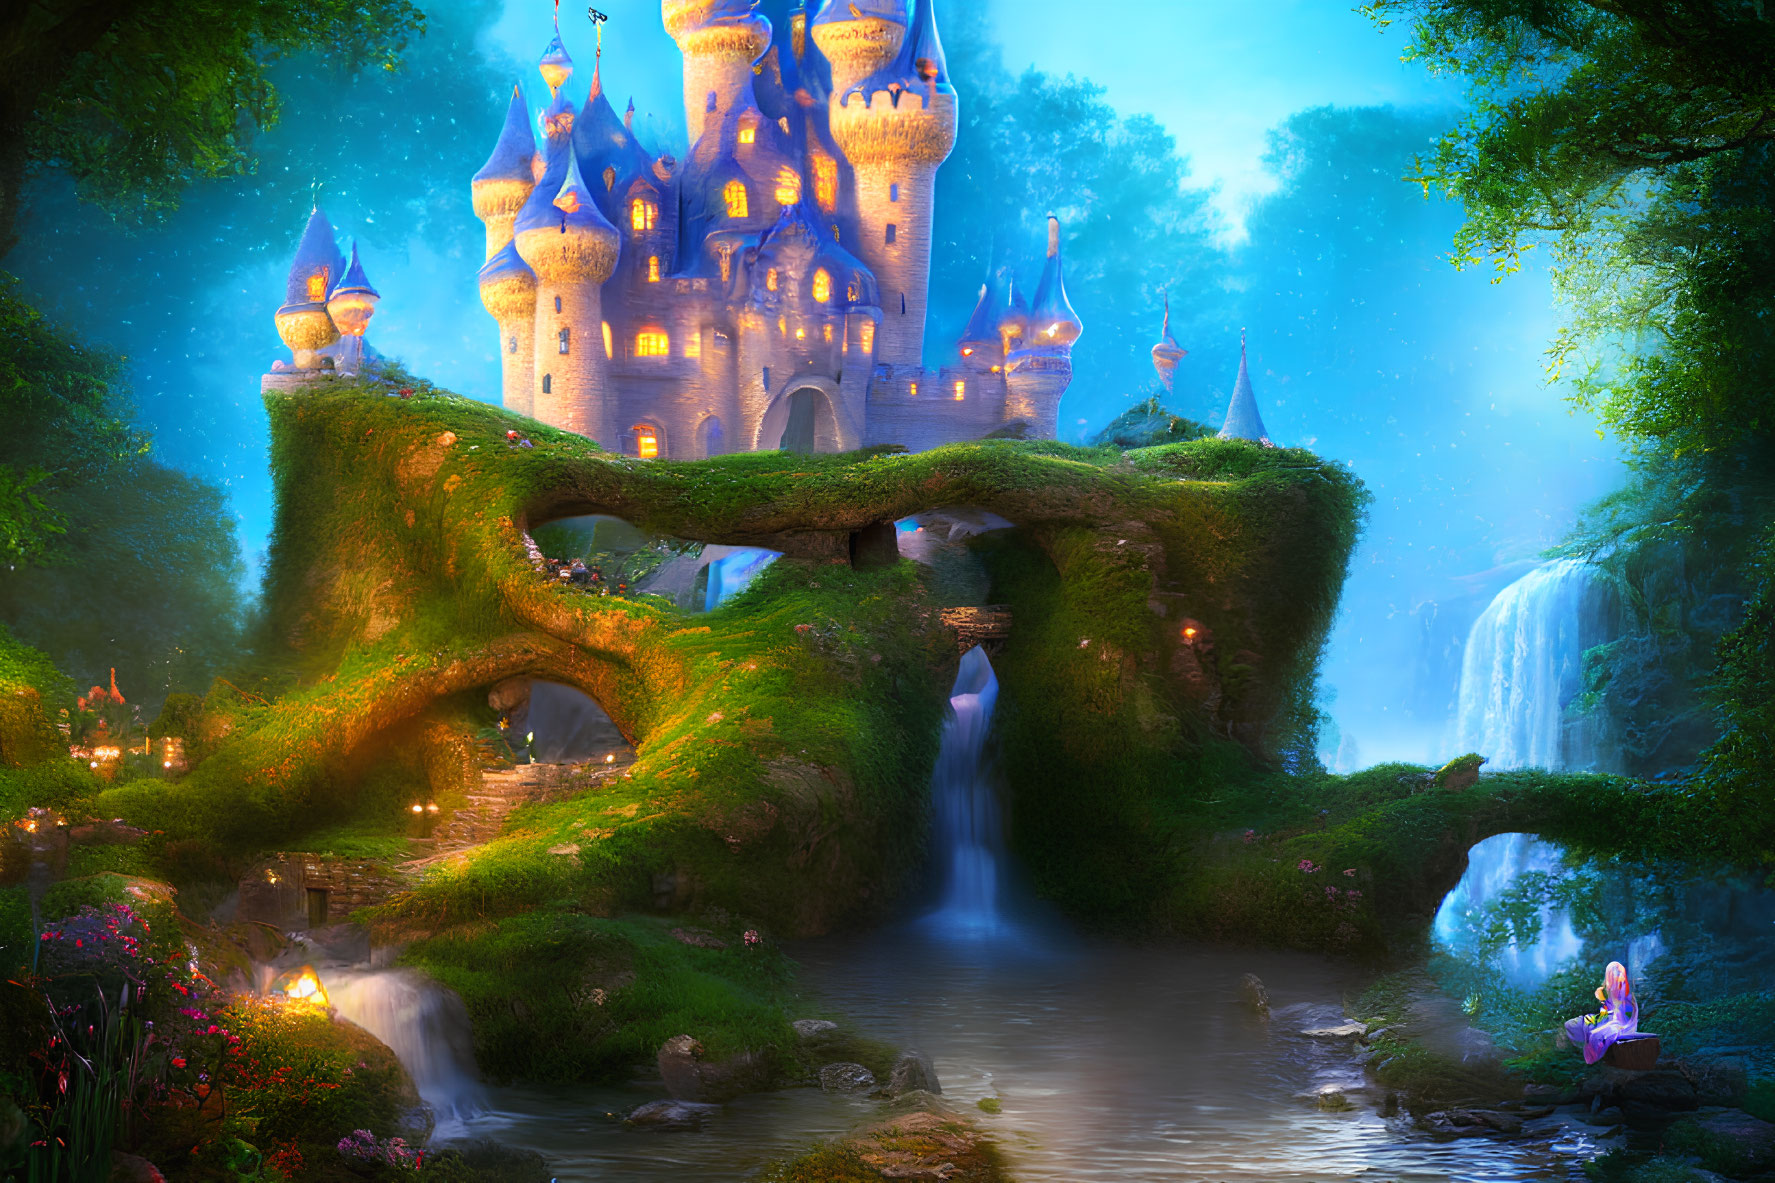 Enchanting castle in lush greenery with waterfalls, serene river, glowing bridge, and figure